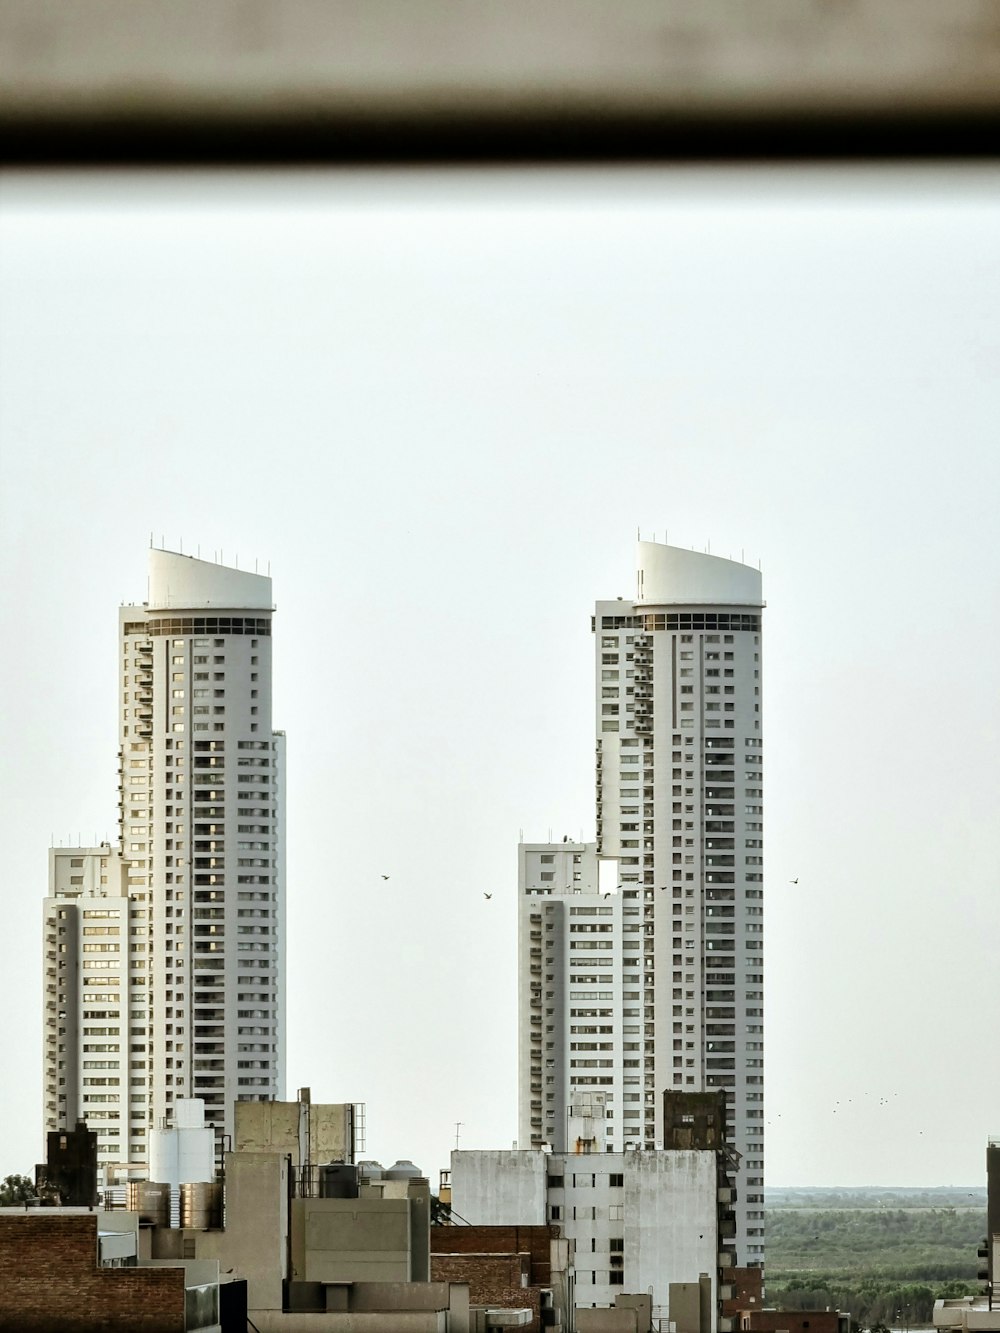 a view of some very tall buildings from a window